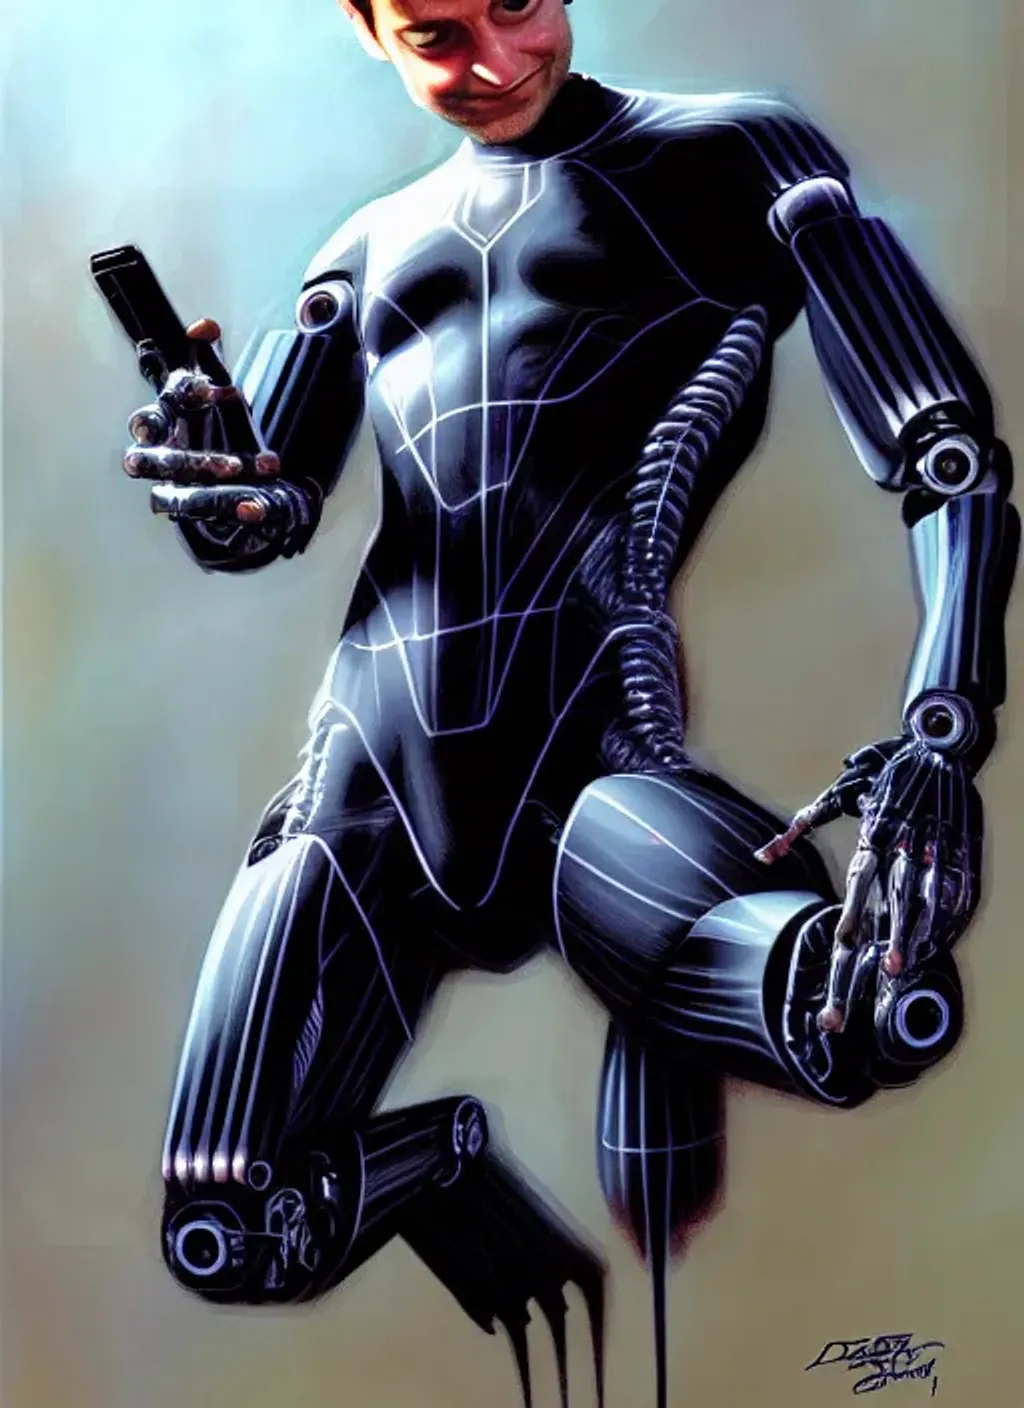 Prompt: Tobey Maguire Cyborg, by Dave Dorman